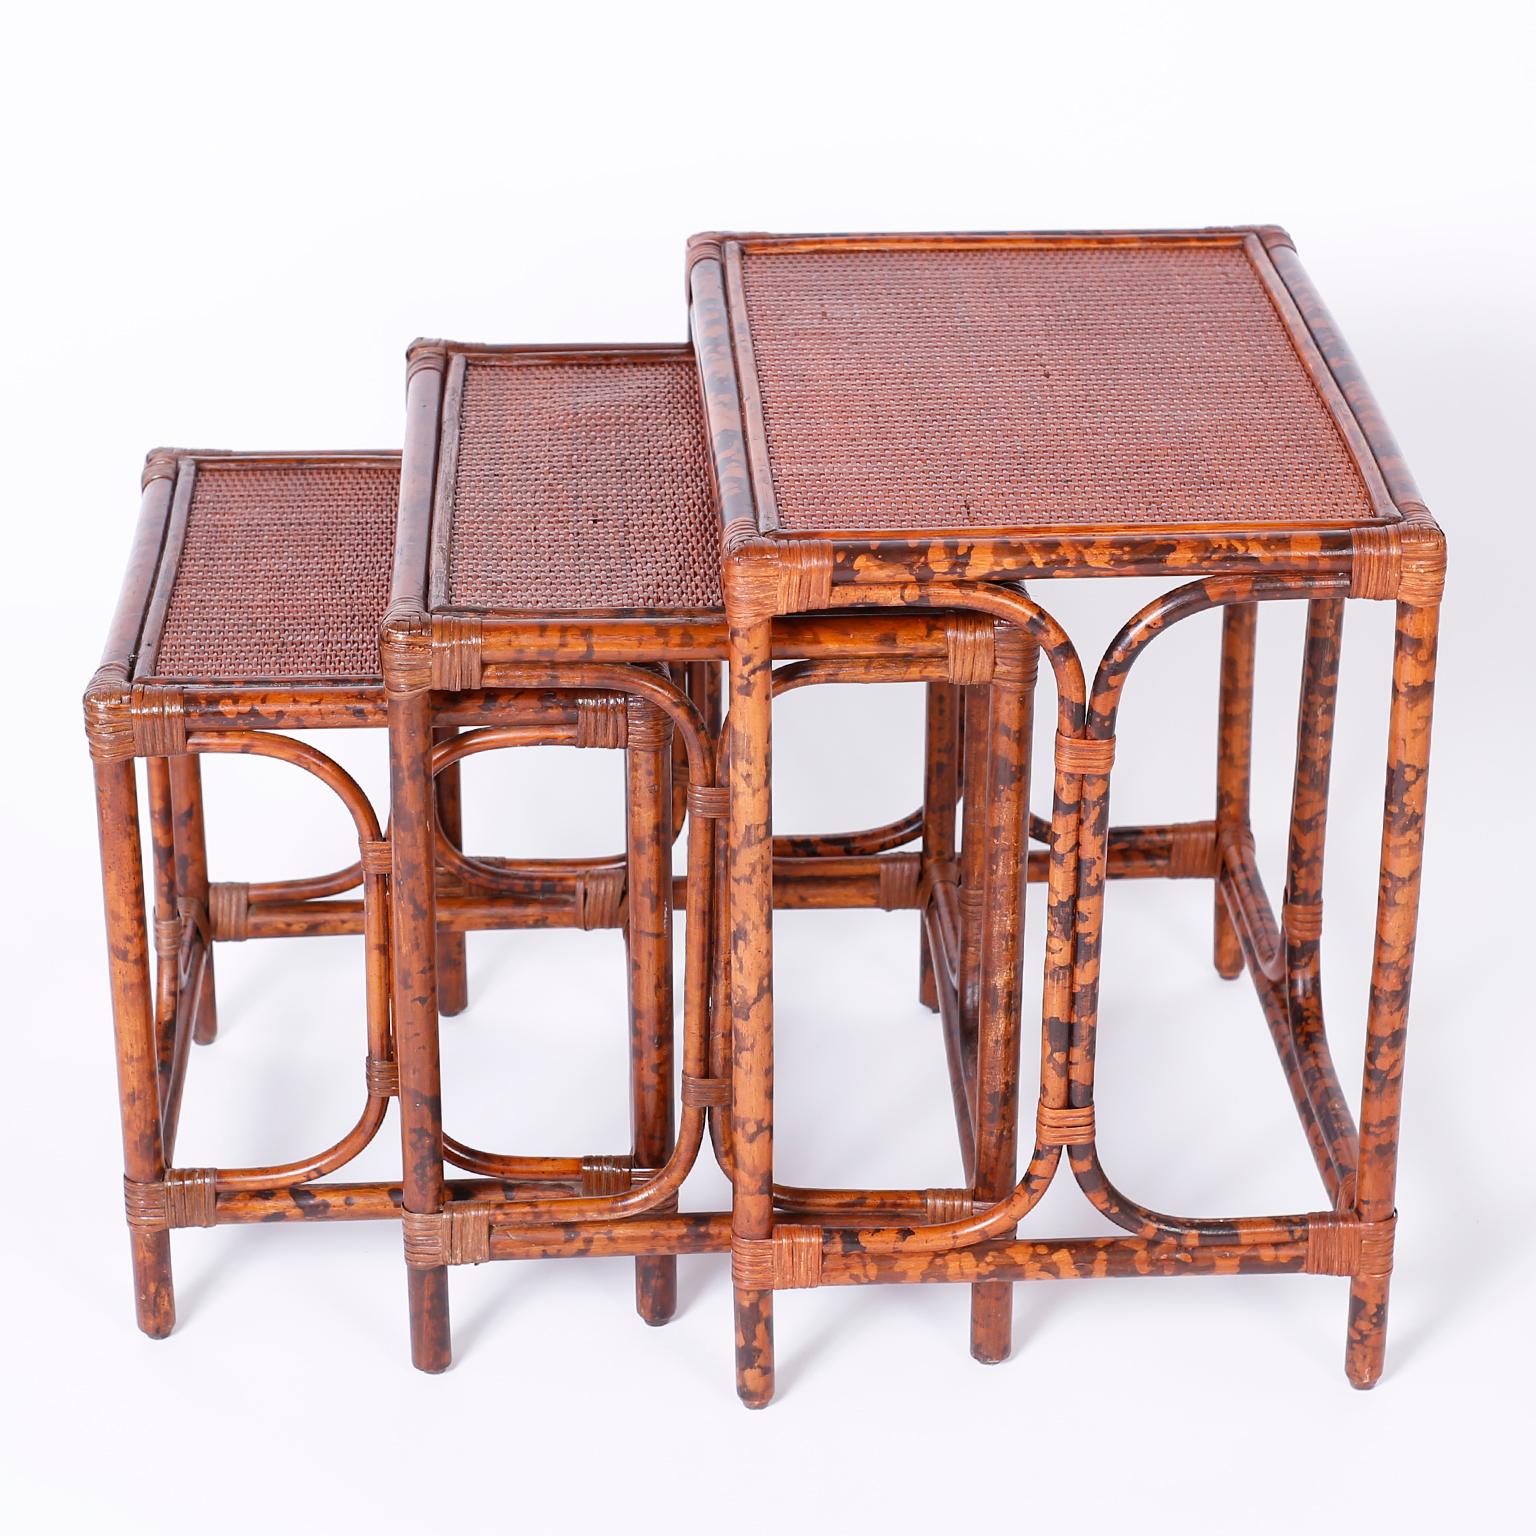 Nest of three tables with faux tortoise wood and bent wood faux bamboo frames wrapped with reed at the joints and grass cloth tops on all three.

Measures: Largest to smallest:

H 22 W 20 D 18
H 21 W 19 D 16
H 16 W 14 D 13.